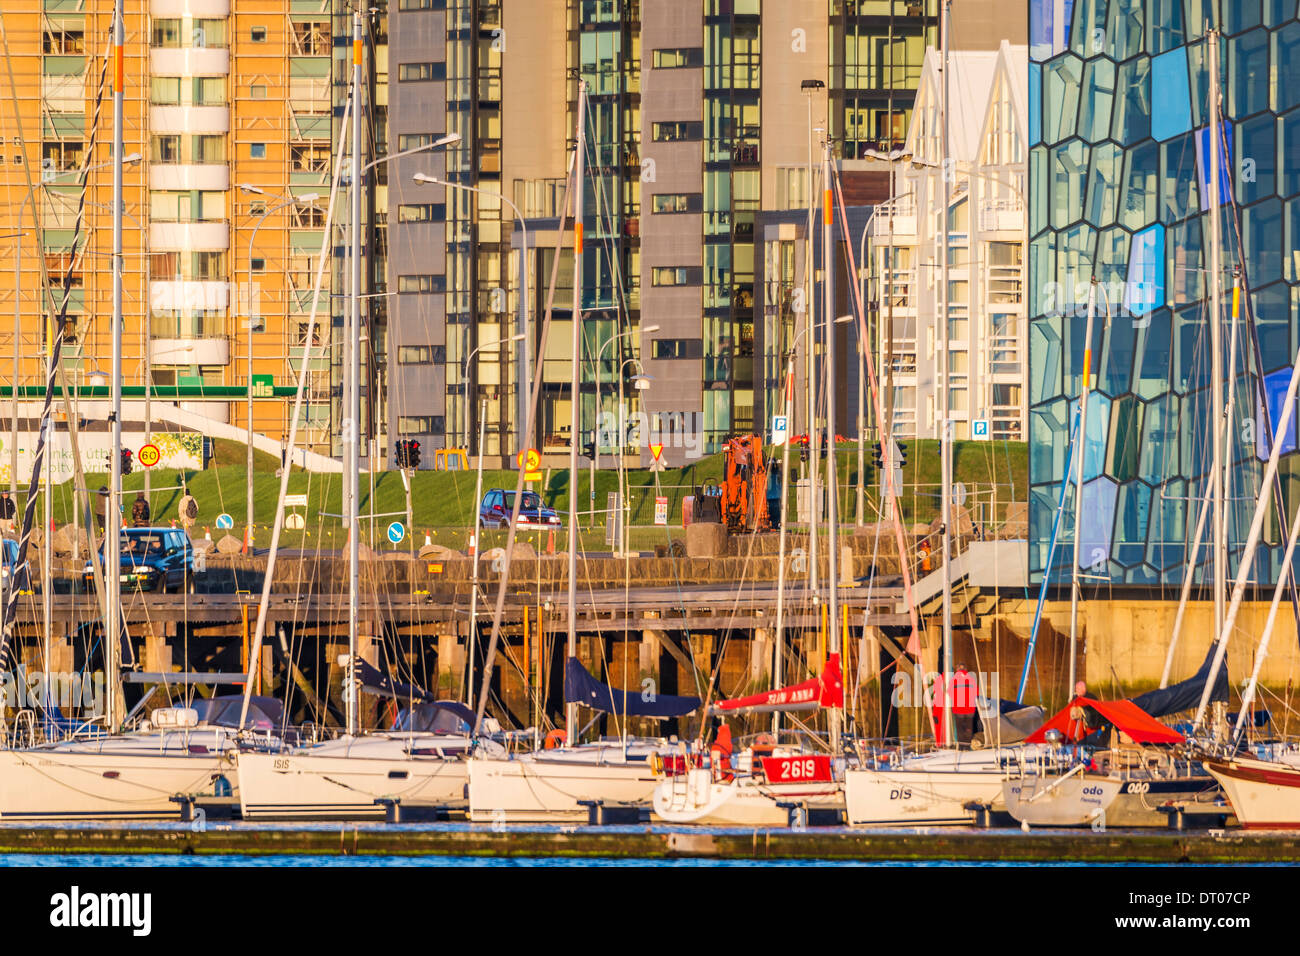 Sailboats and apartment buildings, Reykjavik Iceland. Stock Photo